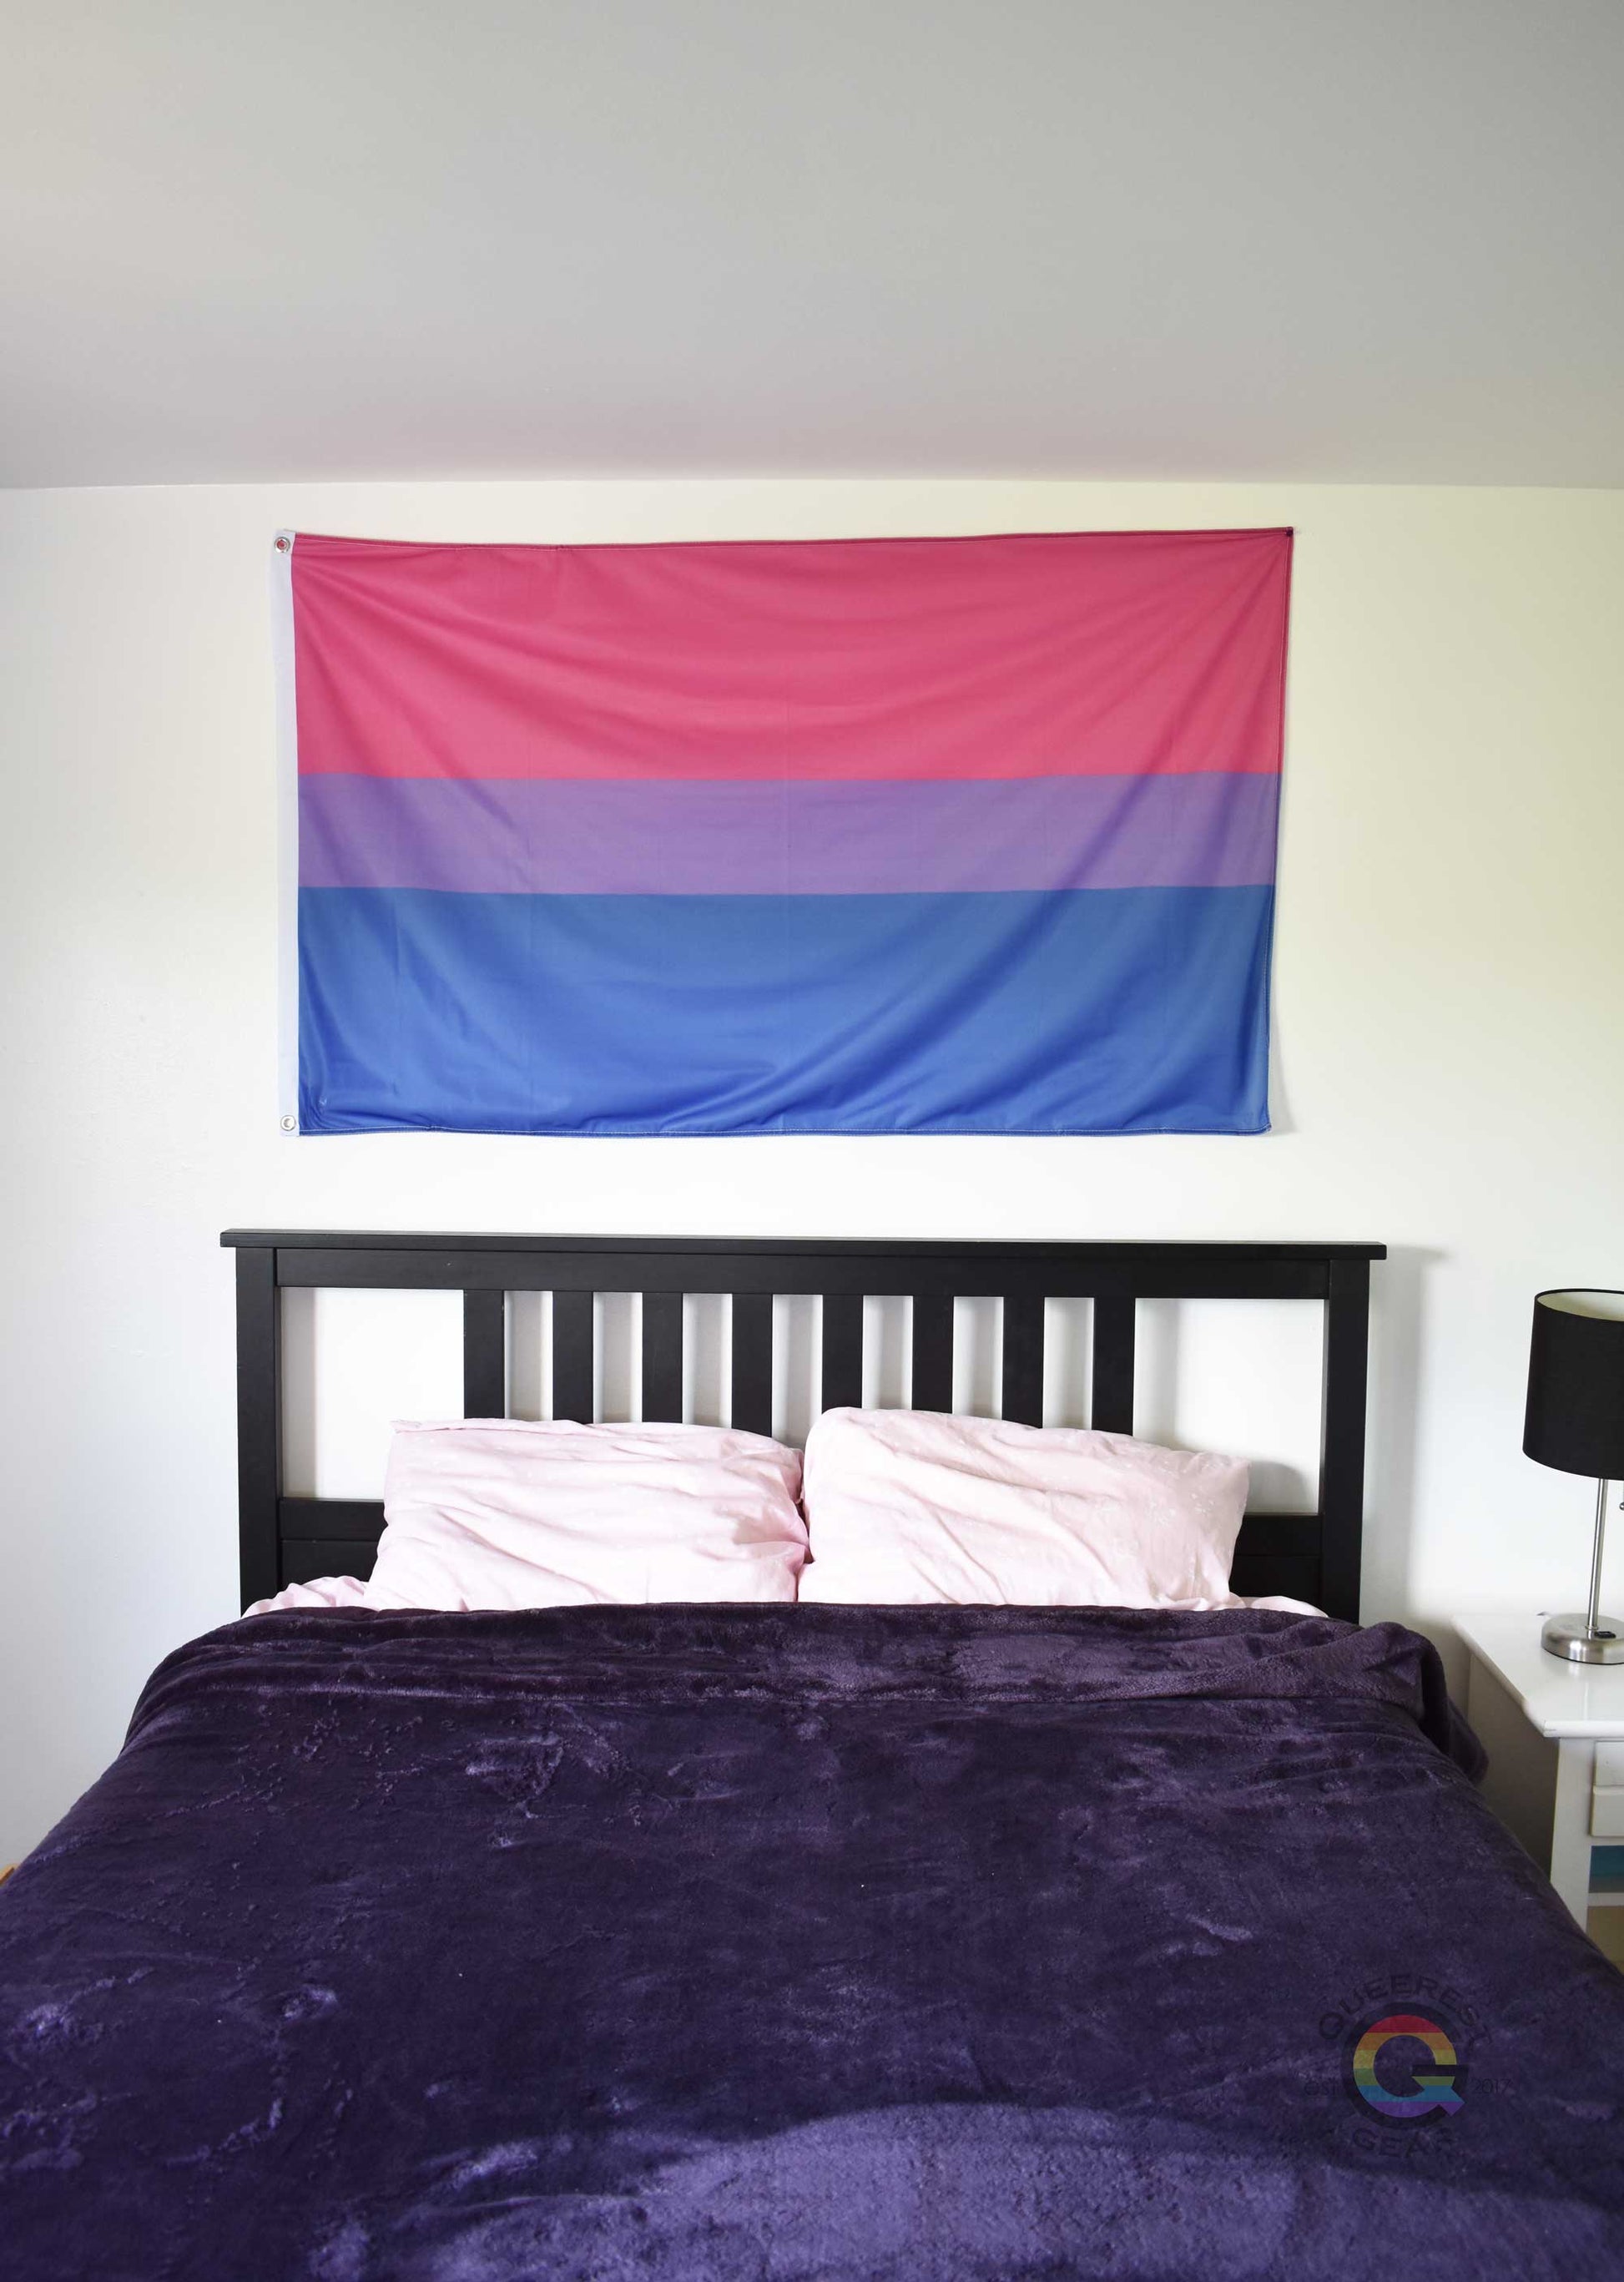 3’x5’ bisexual pride flag hanging horizontally on the wall of a bedroom centered above a bed with a purple blanket